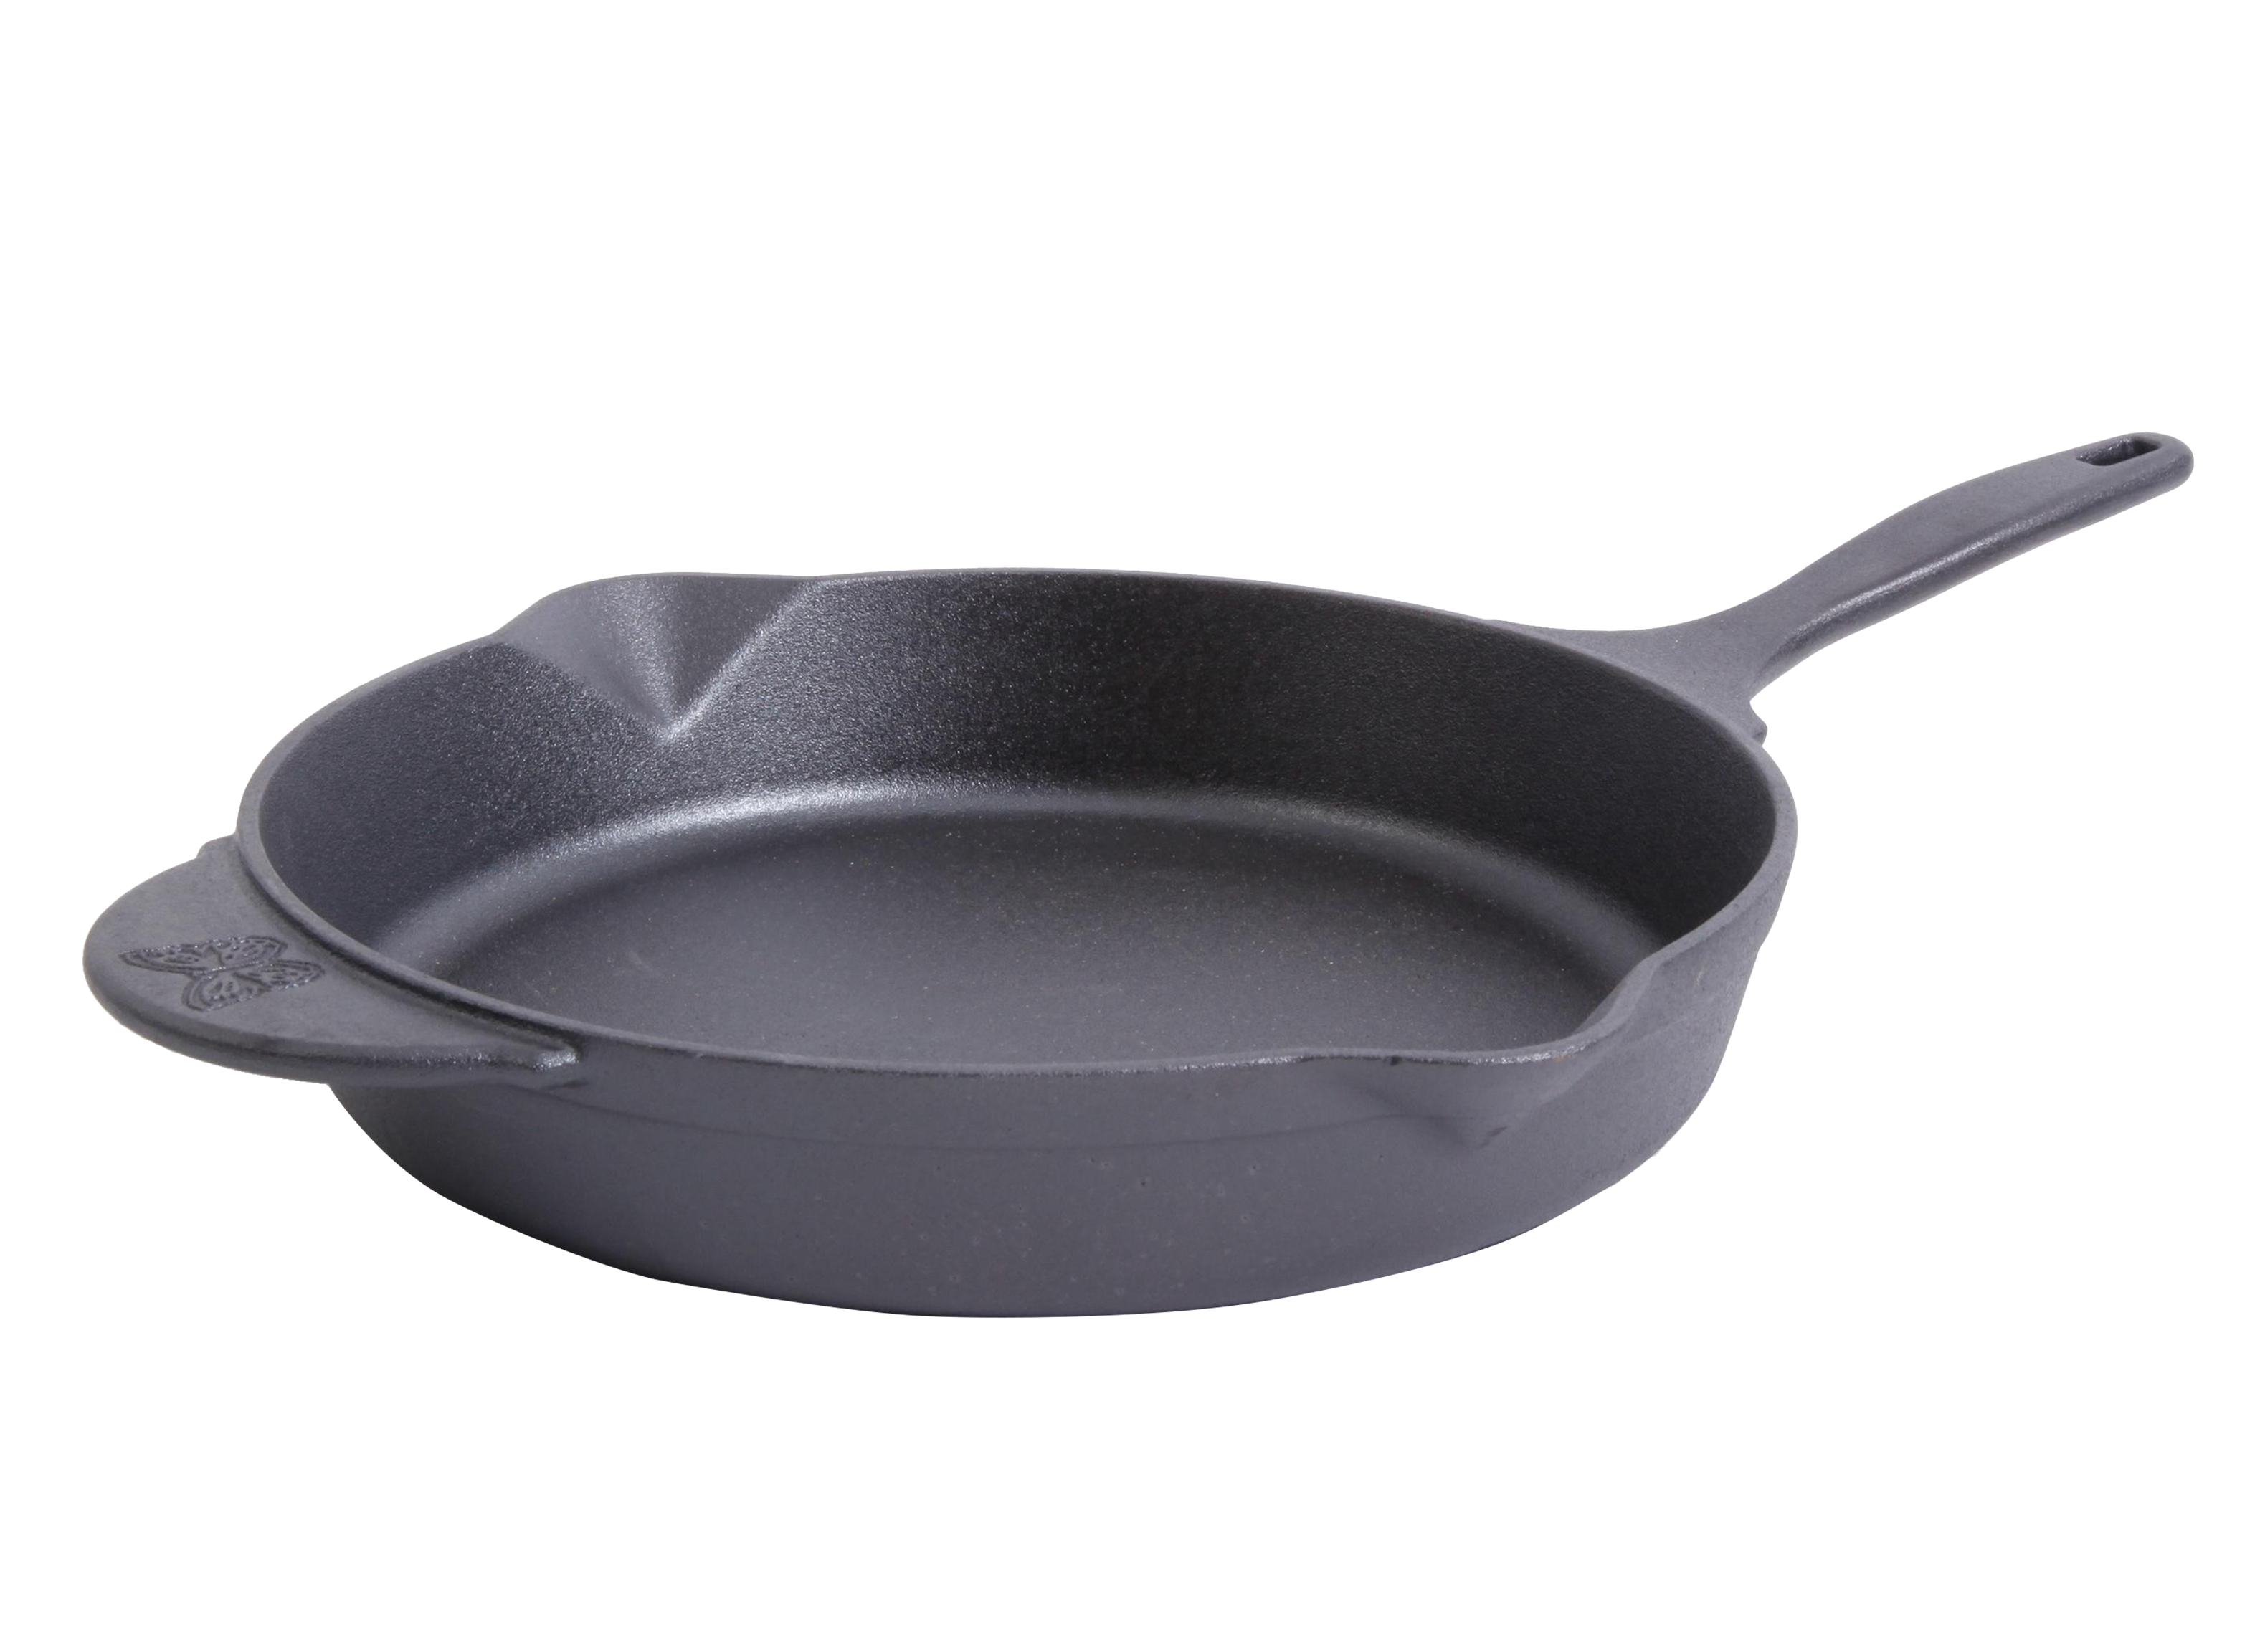 https://crdms.images.consumerreports.org/prod/products/cr/models/397729-frying-pans-pioneer-woman-pre-seasoned-cast-iron-skillet-10002939.png